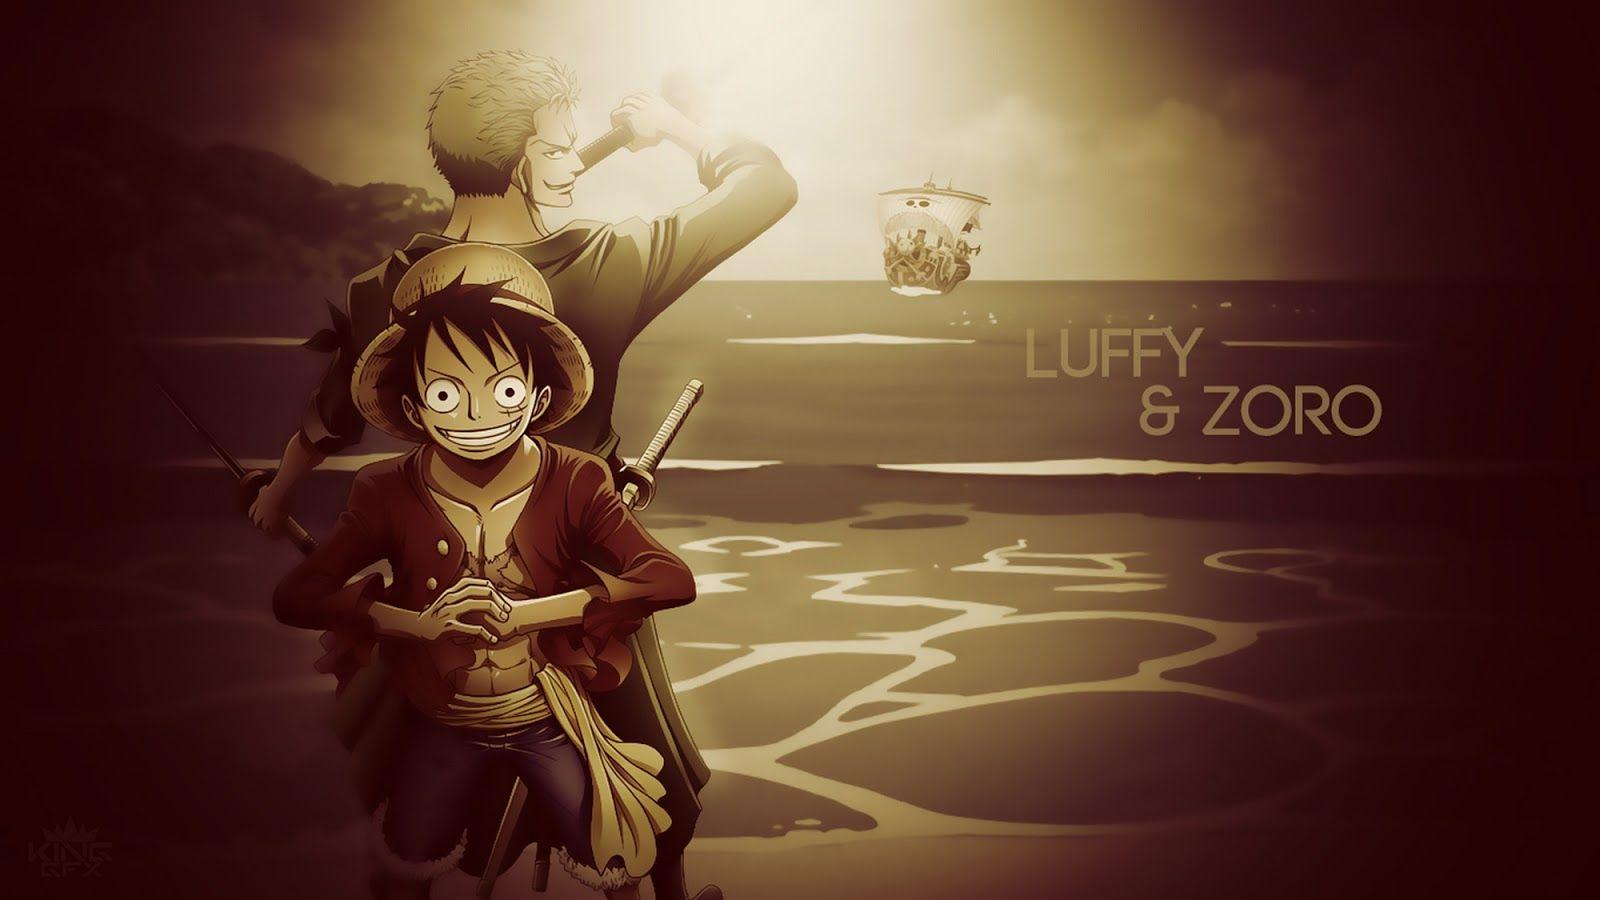 Luffy Zoro One Piece Straw Hat Anime HD Wallpaper Background Photo Image Picture. One piece theme, Luffy, One piece luffy